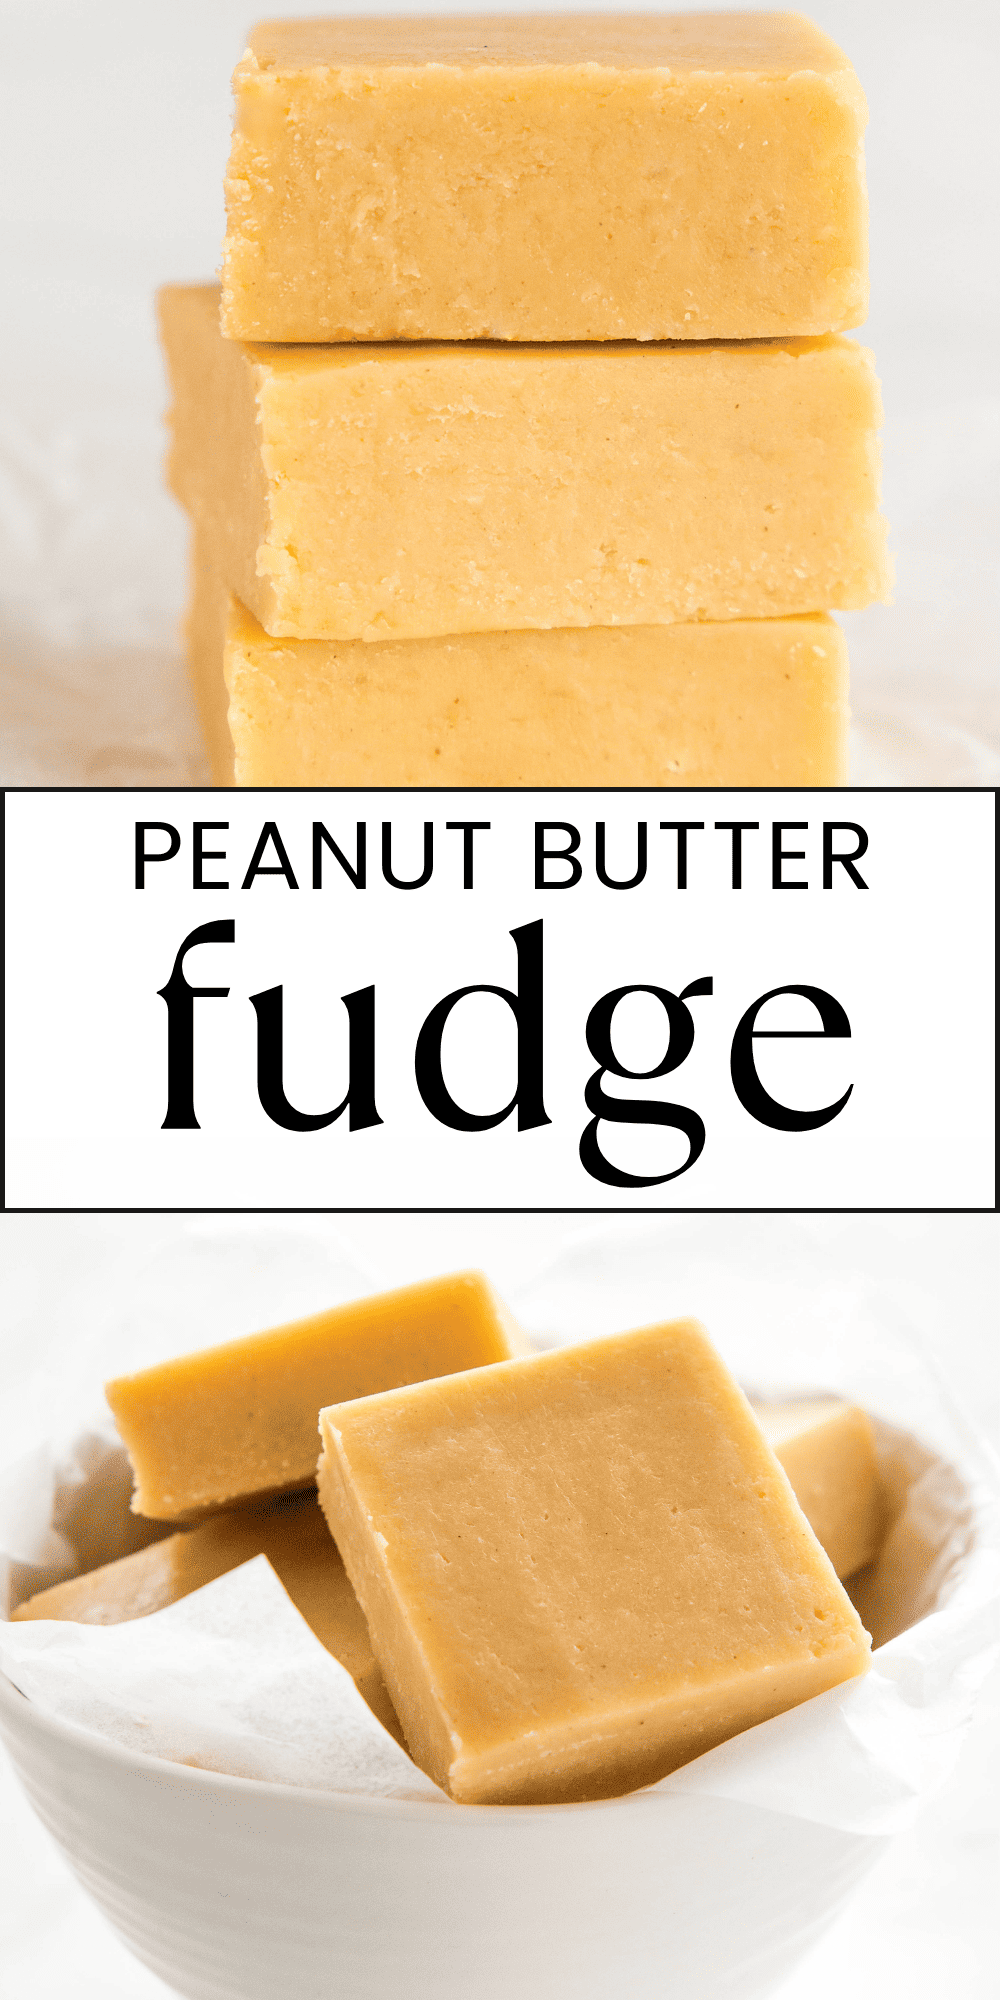 This Peanut Butter Fudge Recipe is the perfect easy-to-make treat that's ready in minutes and made with only 3 ingredients on the stovetop or the microwave! Recipe from thebusybaker.ca! #peanutbutterfudge #fudge #easyfudgerecipe #fudgerecipe #peanutbutterfudgerecipe #easyfudge #microwavefudge #sweetenedcondensedmilkfudge #holidaybaking #christmasbaking #holidayfudge #christmasfudge via @busybakerblog